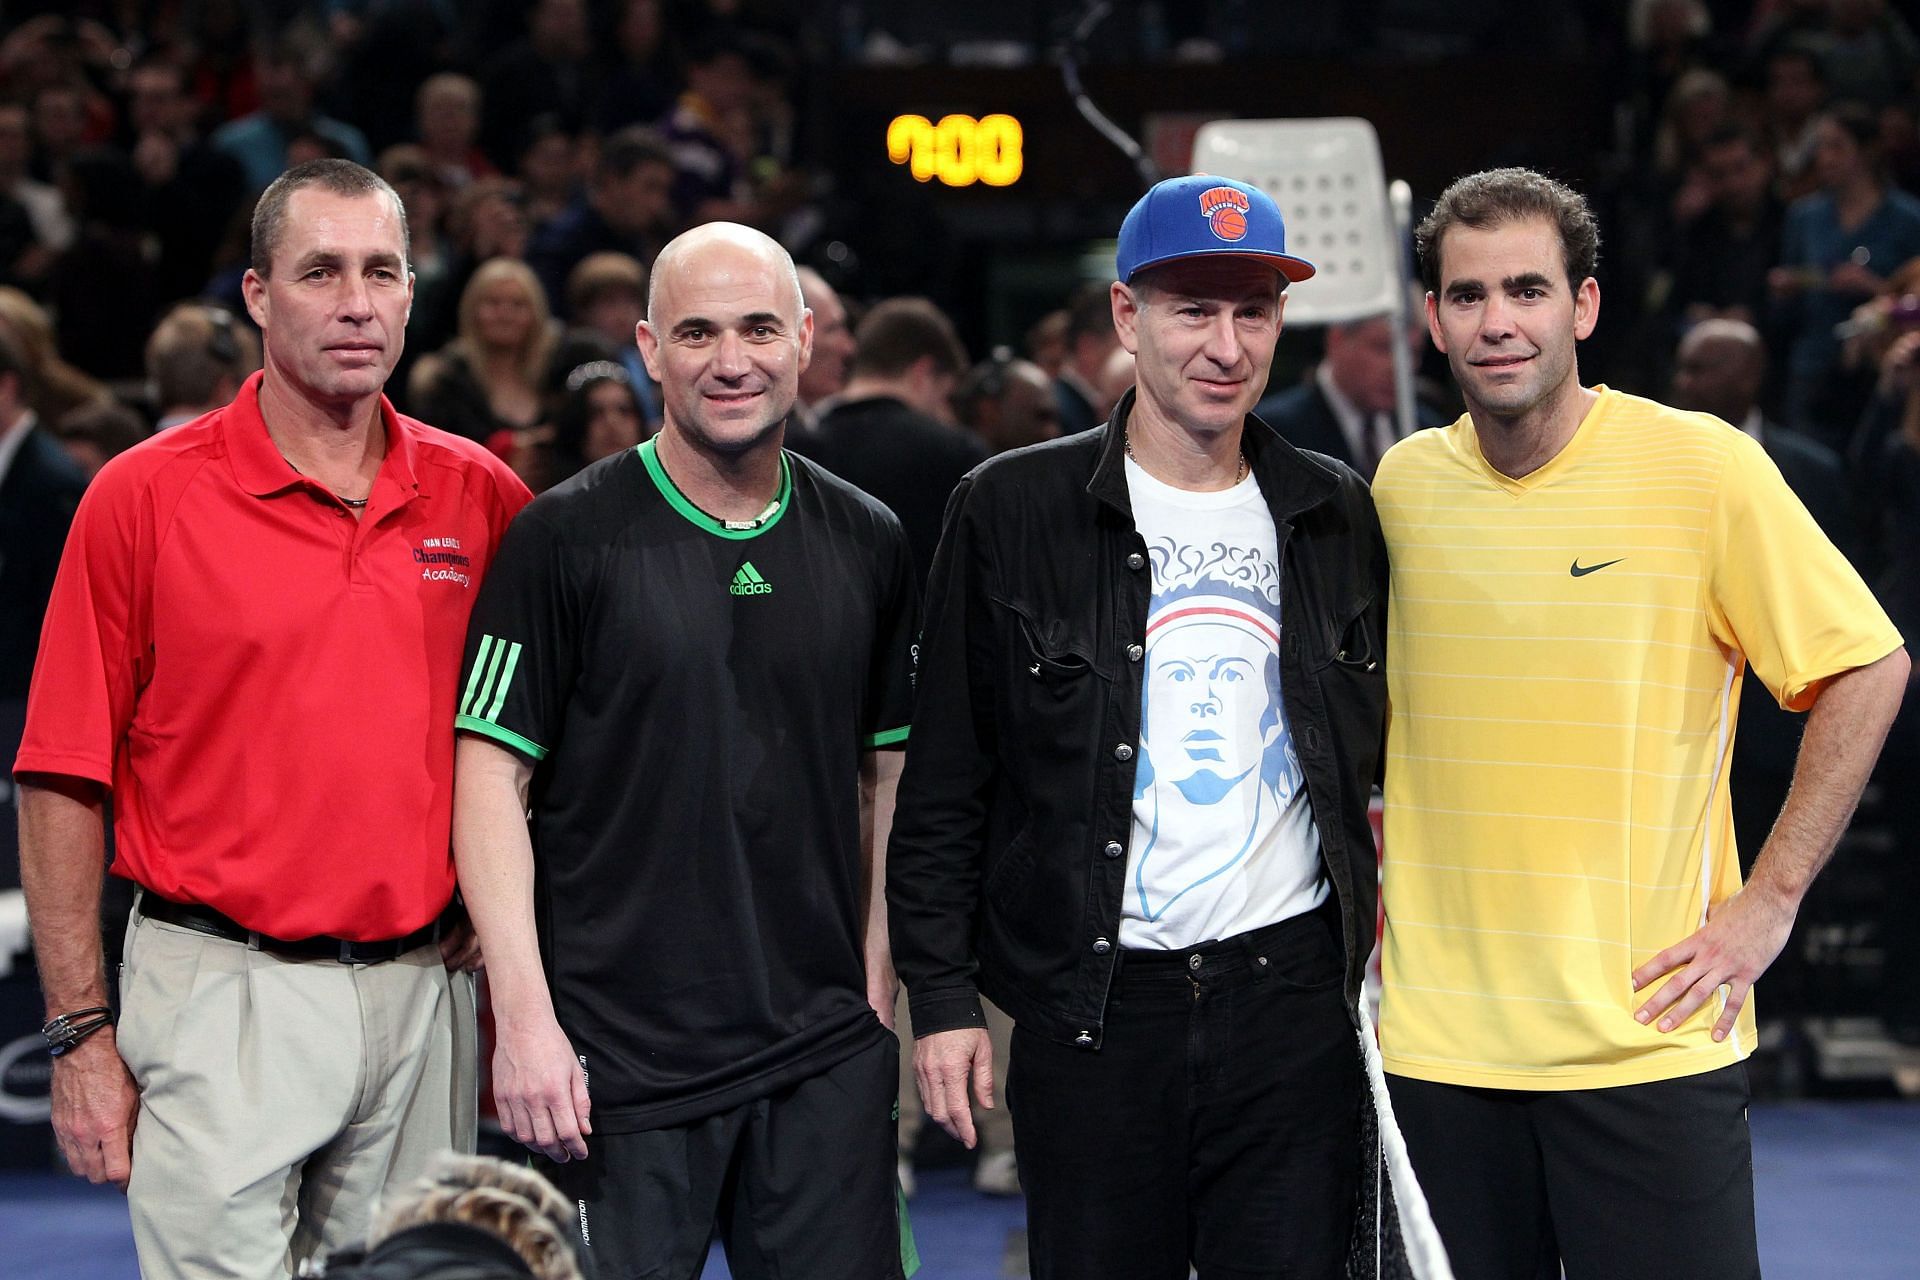 Andre Agassi and John McEnroe with Ivan Lendl and Pete Sampras